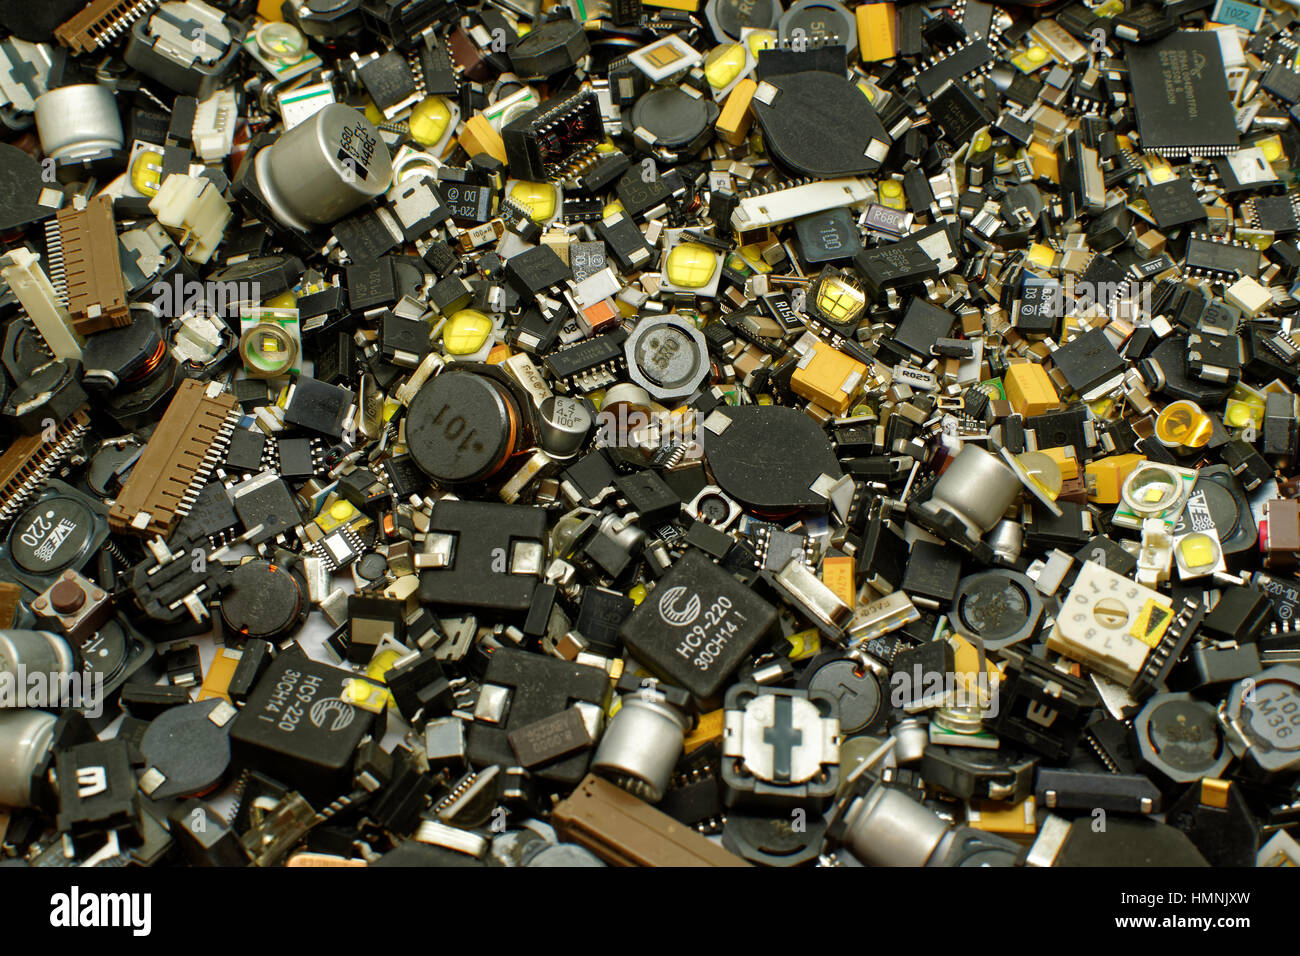 SMD components Stock Photo